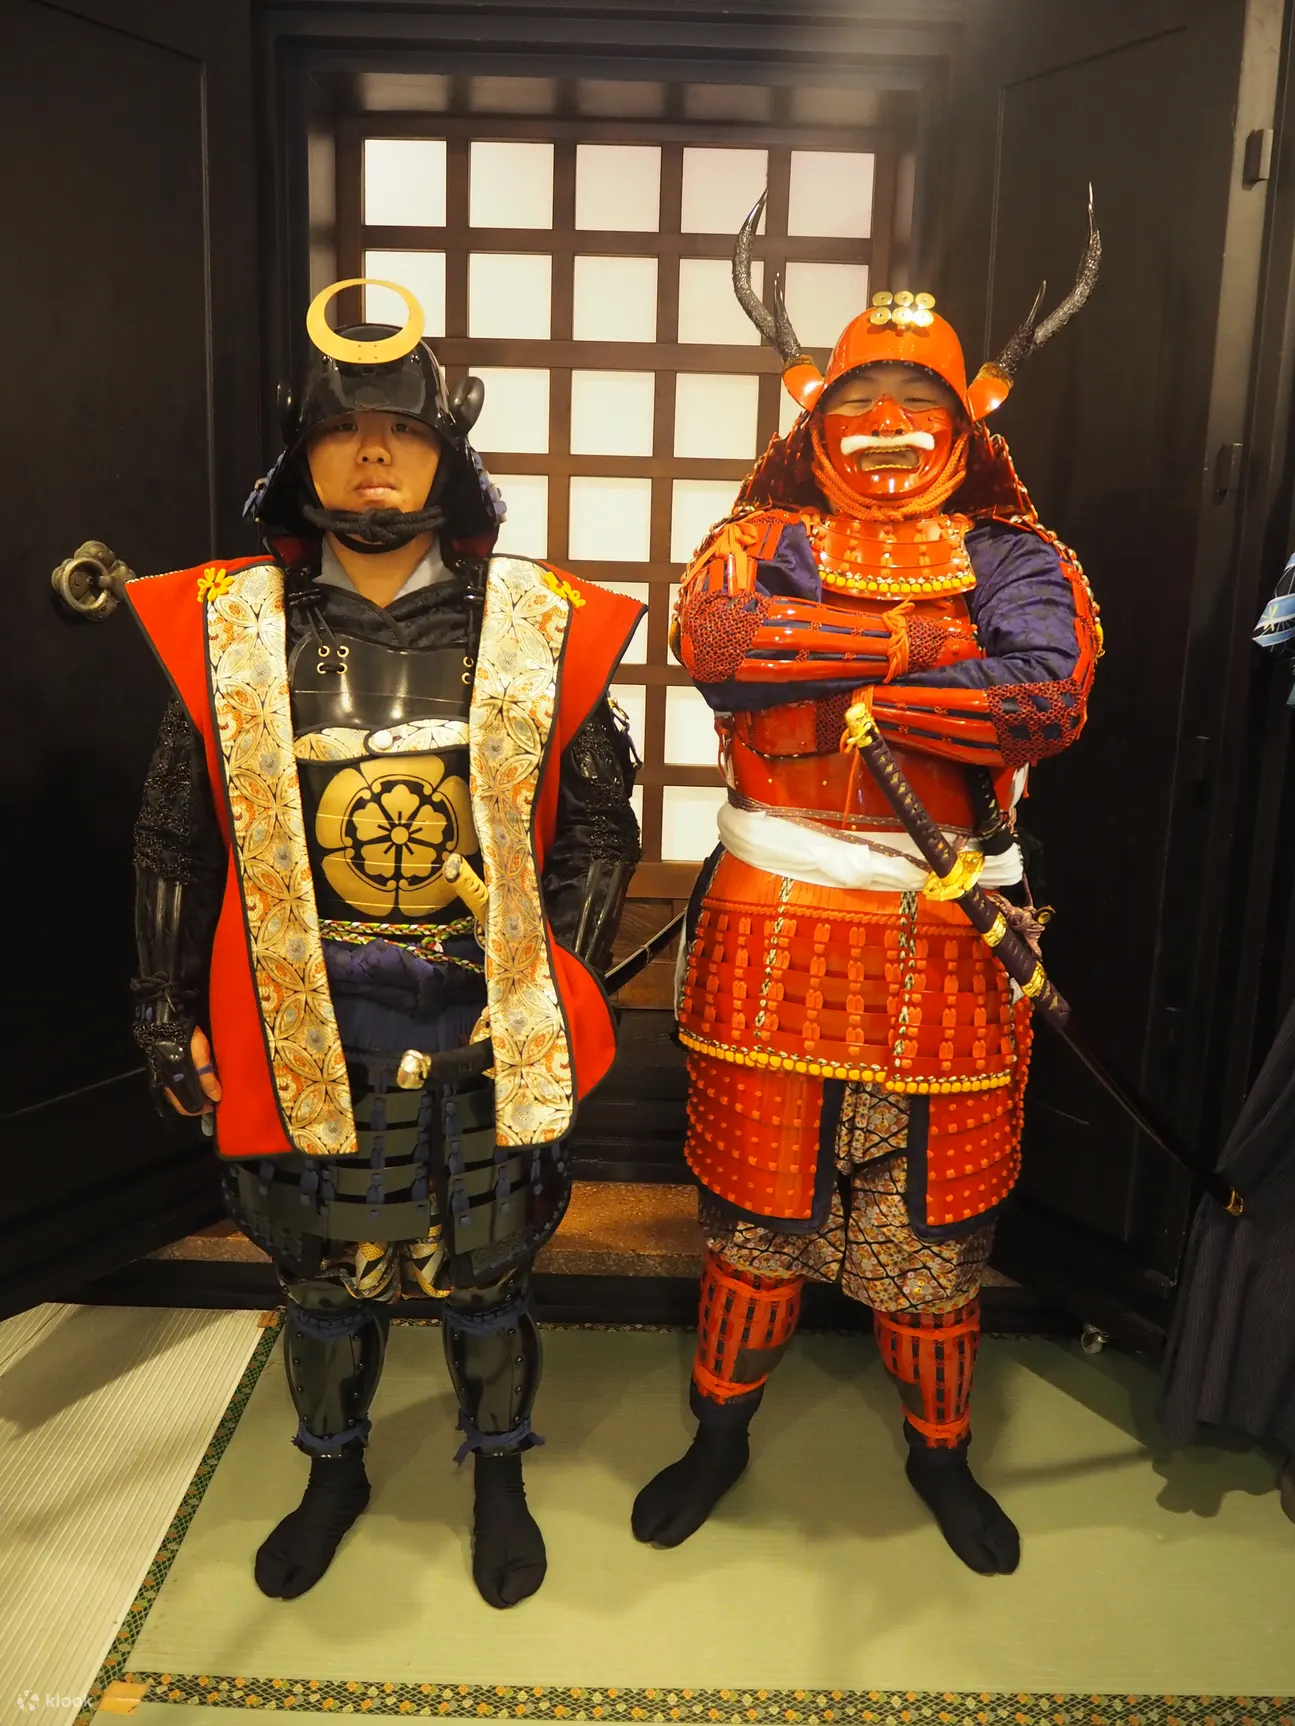 Tub Category recipe Samurai Armor Experience in Tokyo, Japan - Klook United States